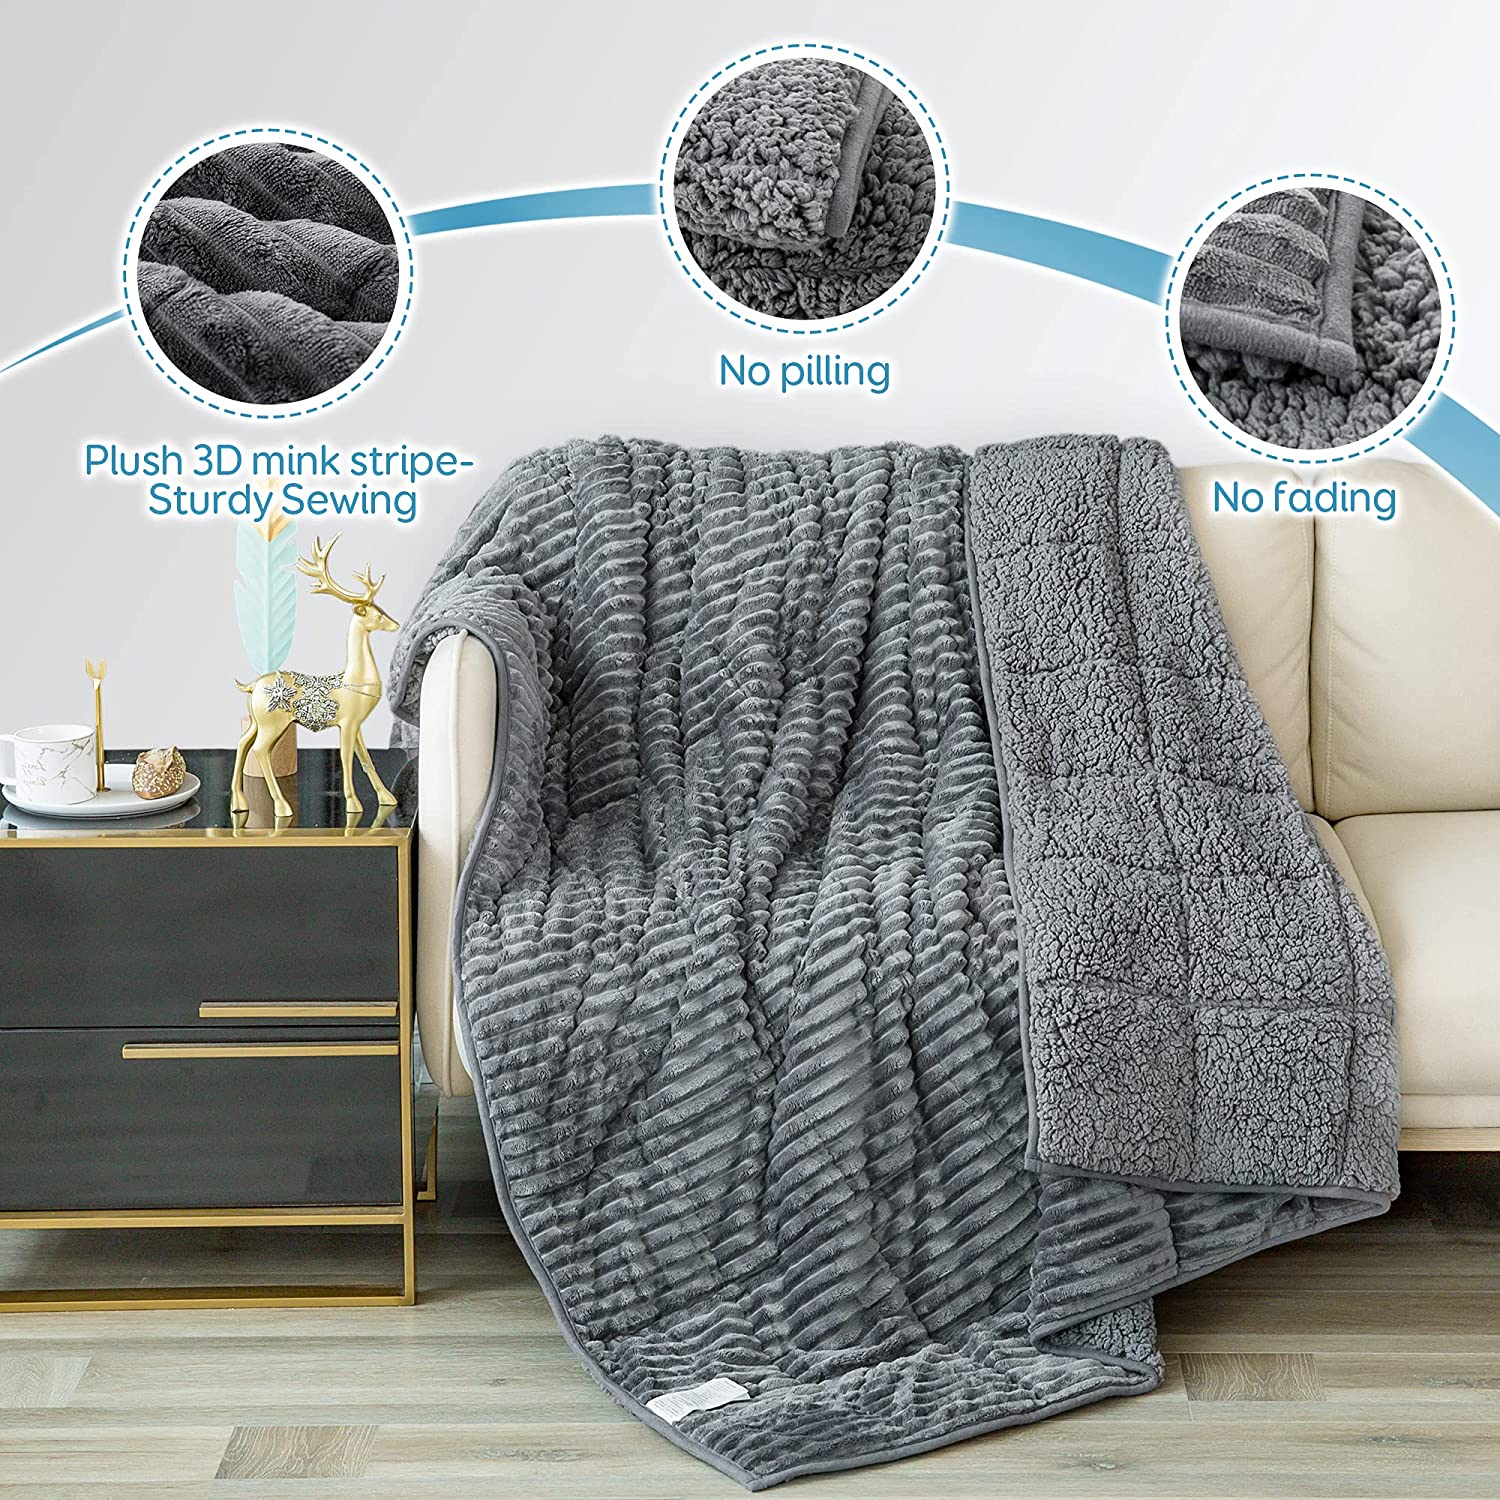 Weighted-blanket-5